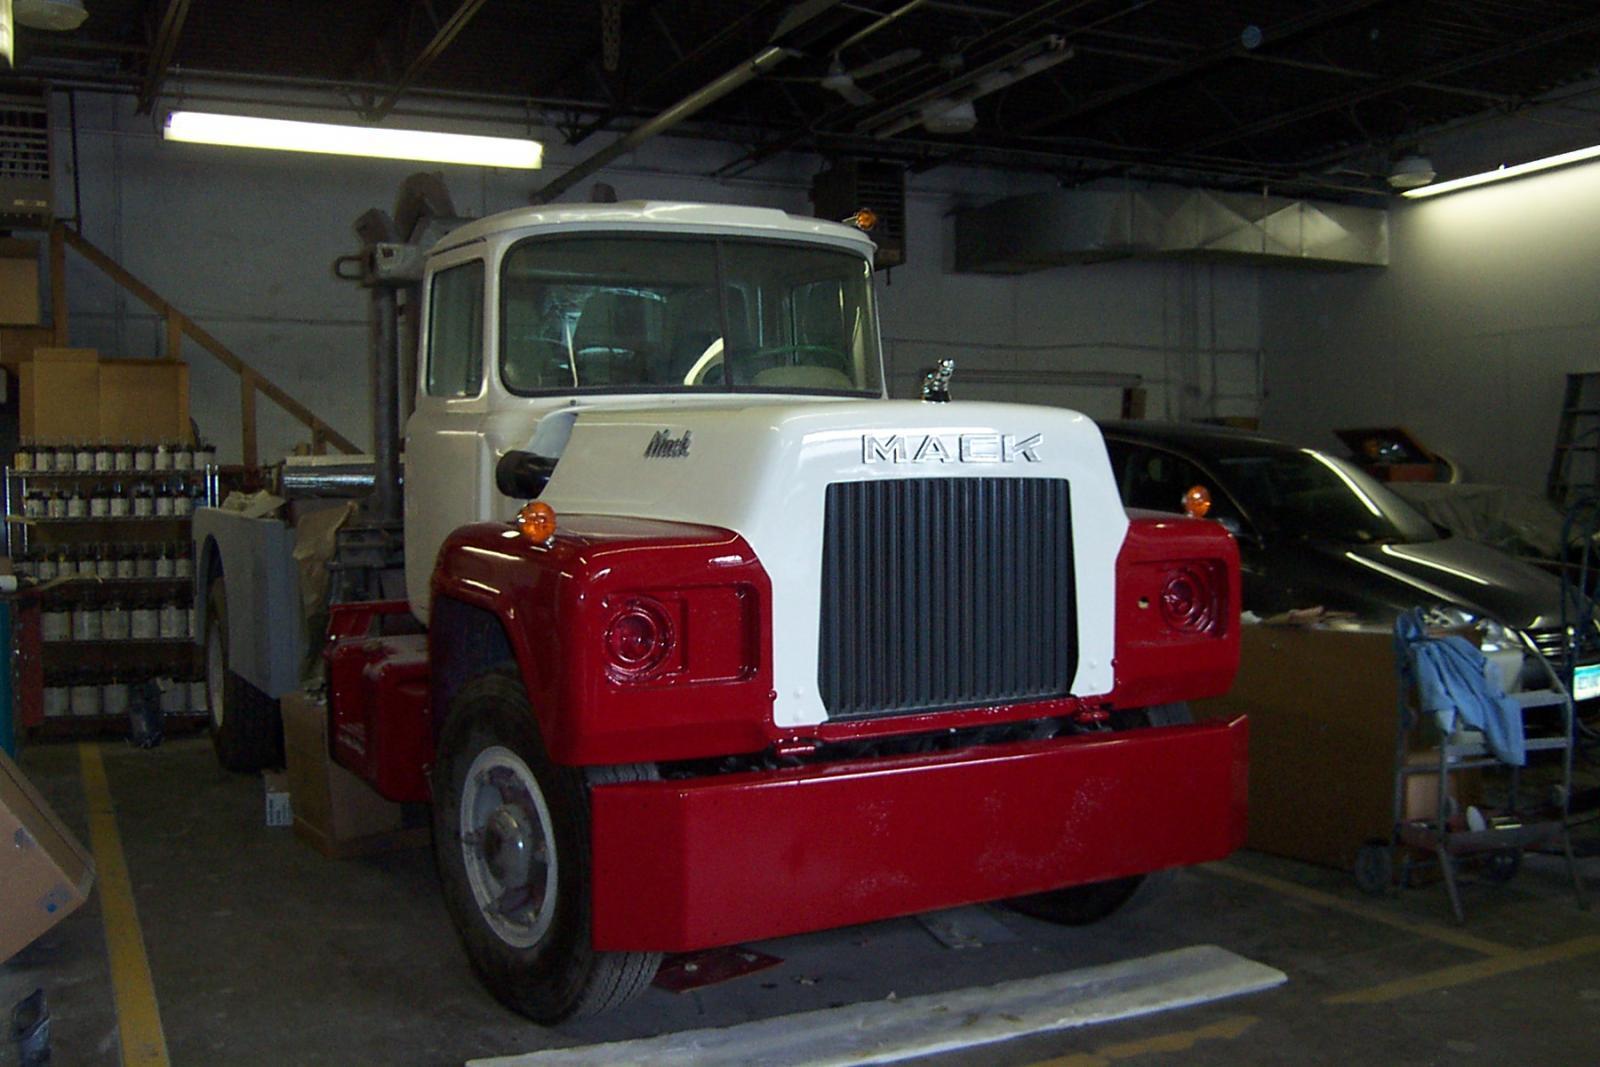 Restoration on the mack continues